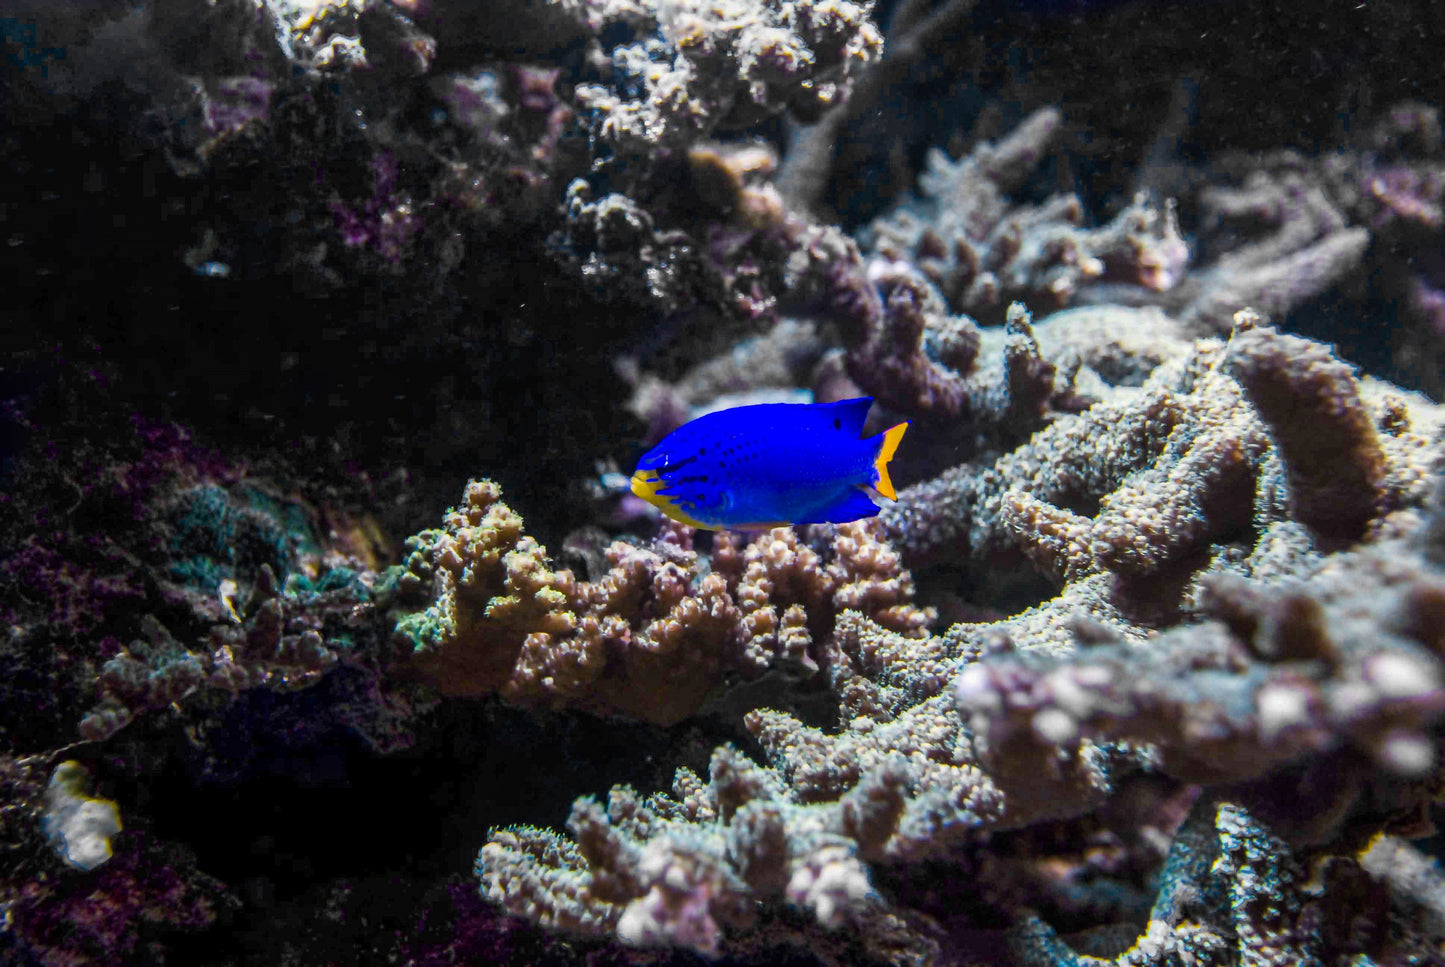 Alessandra Mattanza | LIVING JEWEL, Australia. A brightly colored fish stands out against the pale coral of a reef in Australia. Available as an art print or photographic print on acrylic glass.